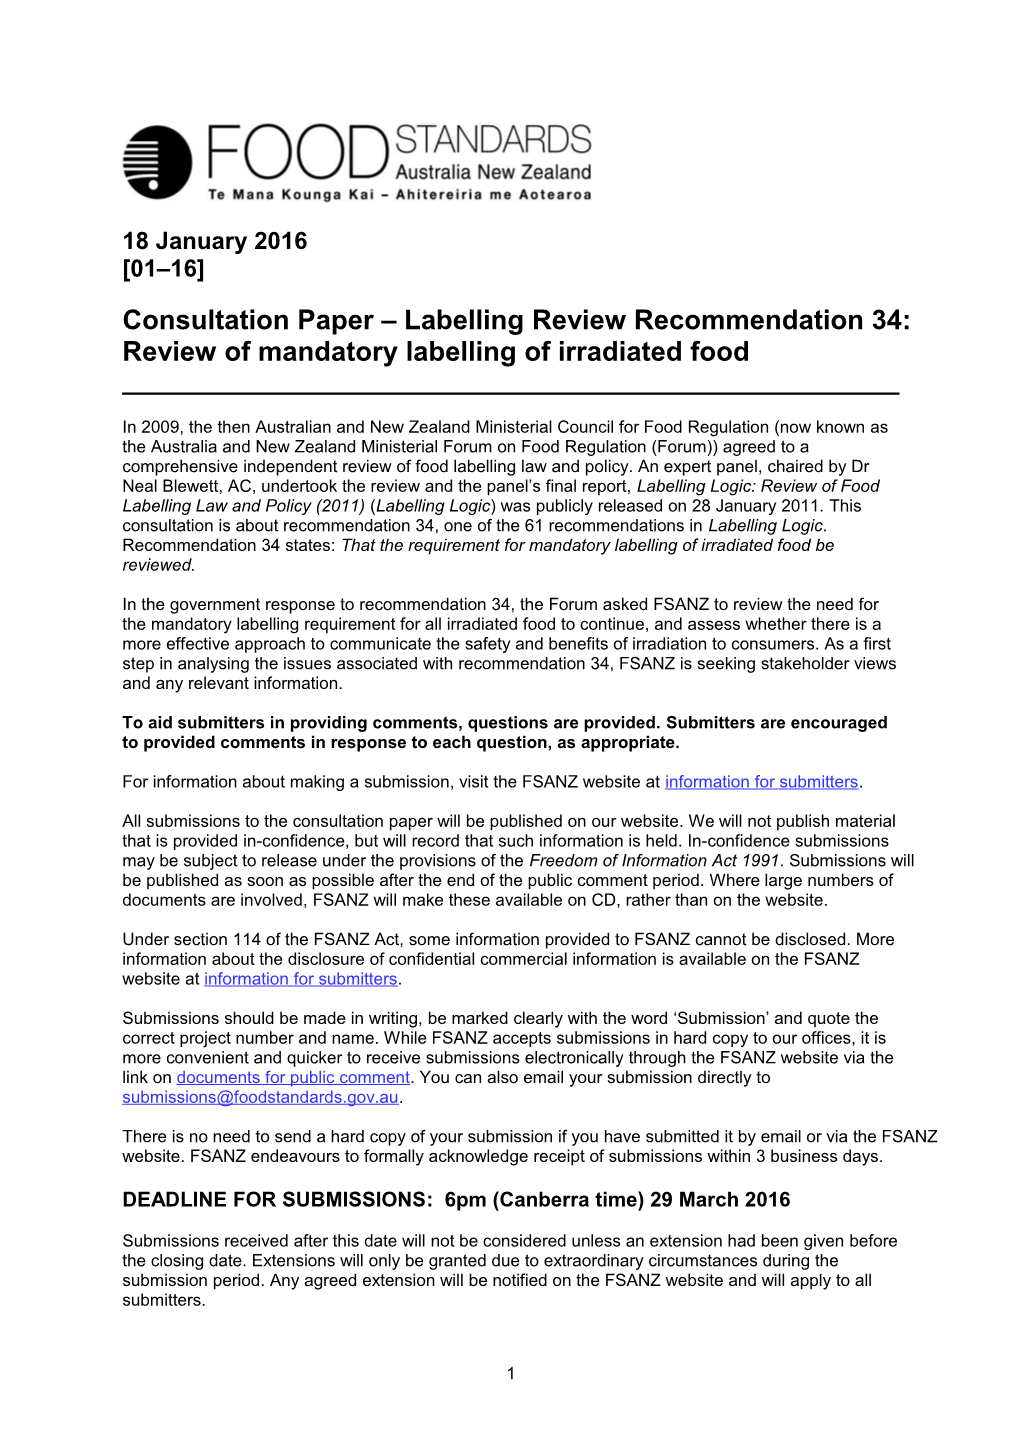 Consultation Paper Labelling Review Recommendation 34: Review of Mandatory Labelling Of